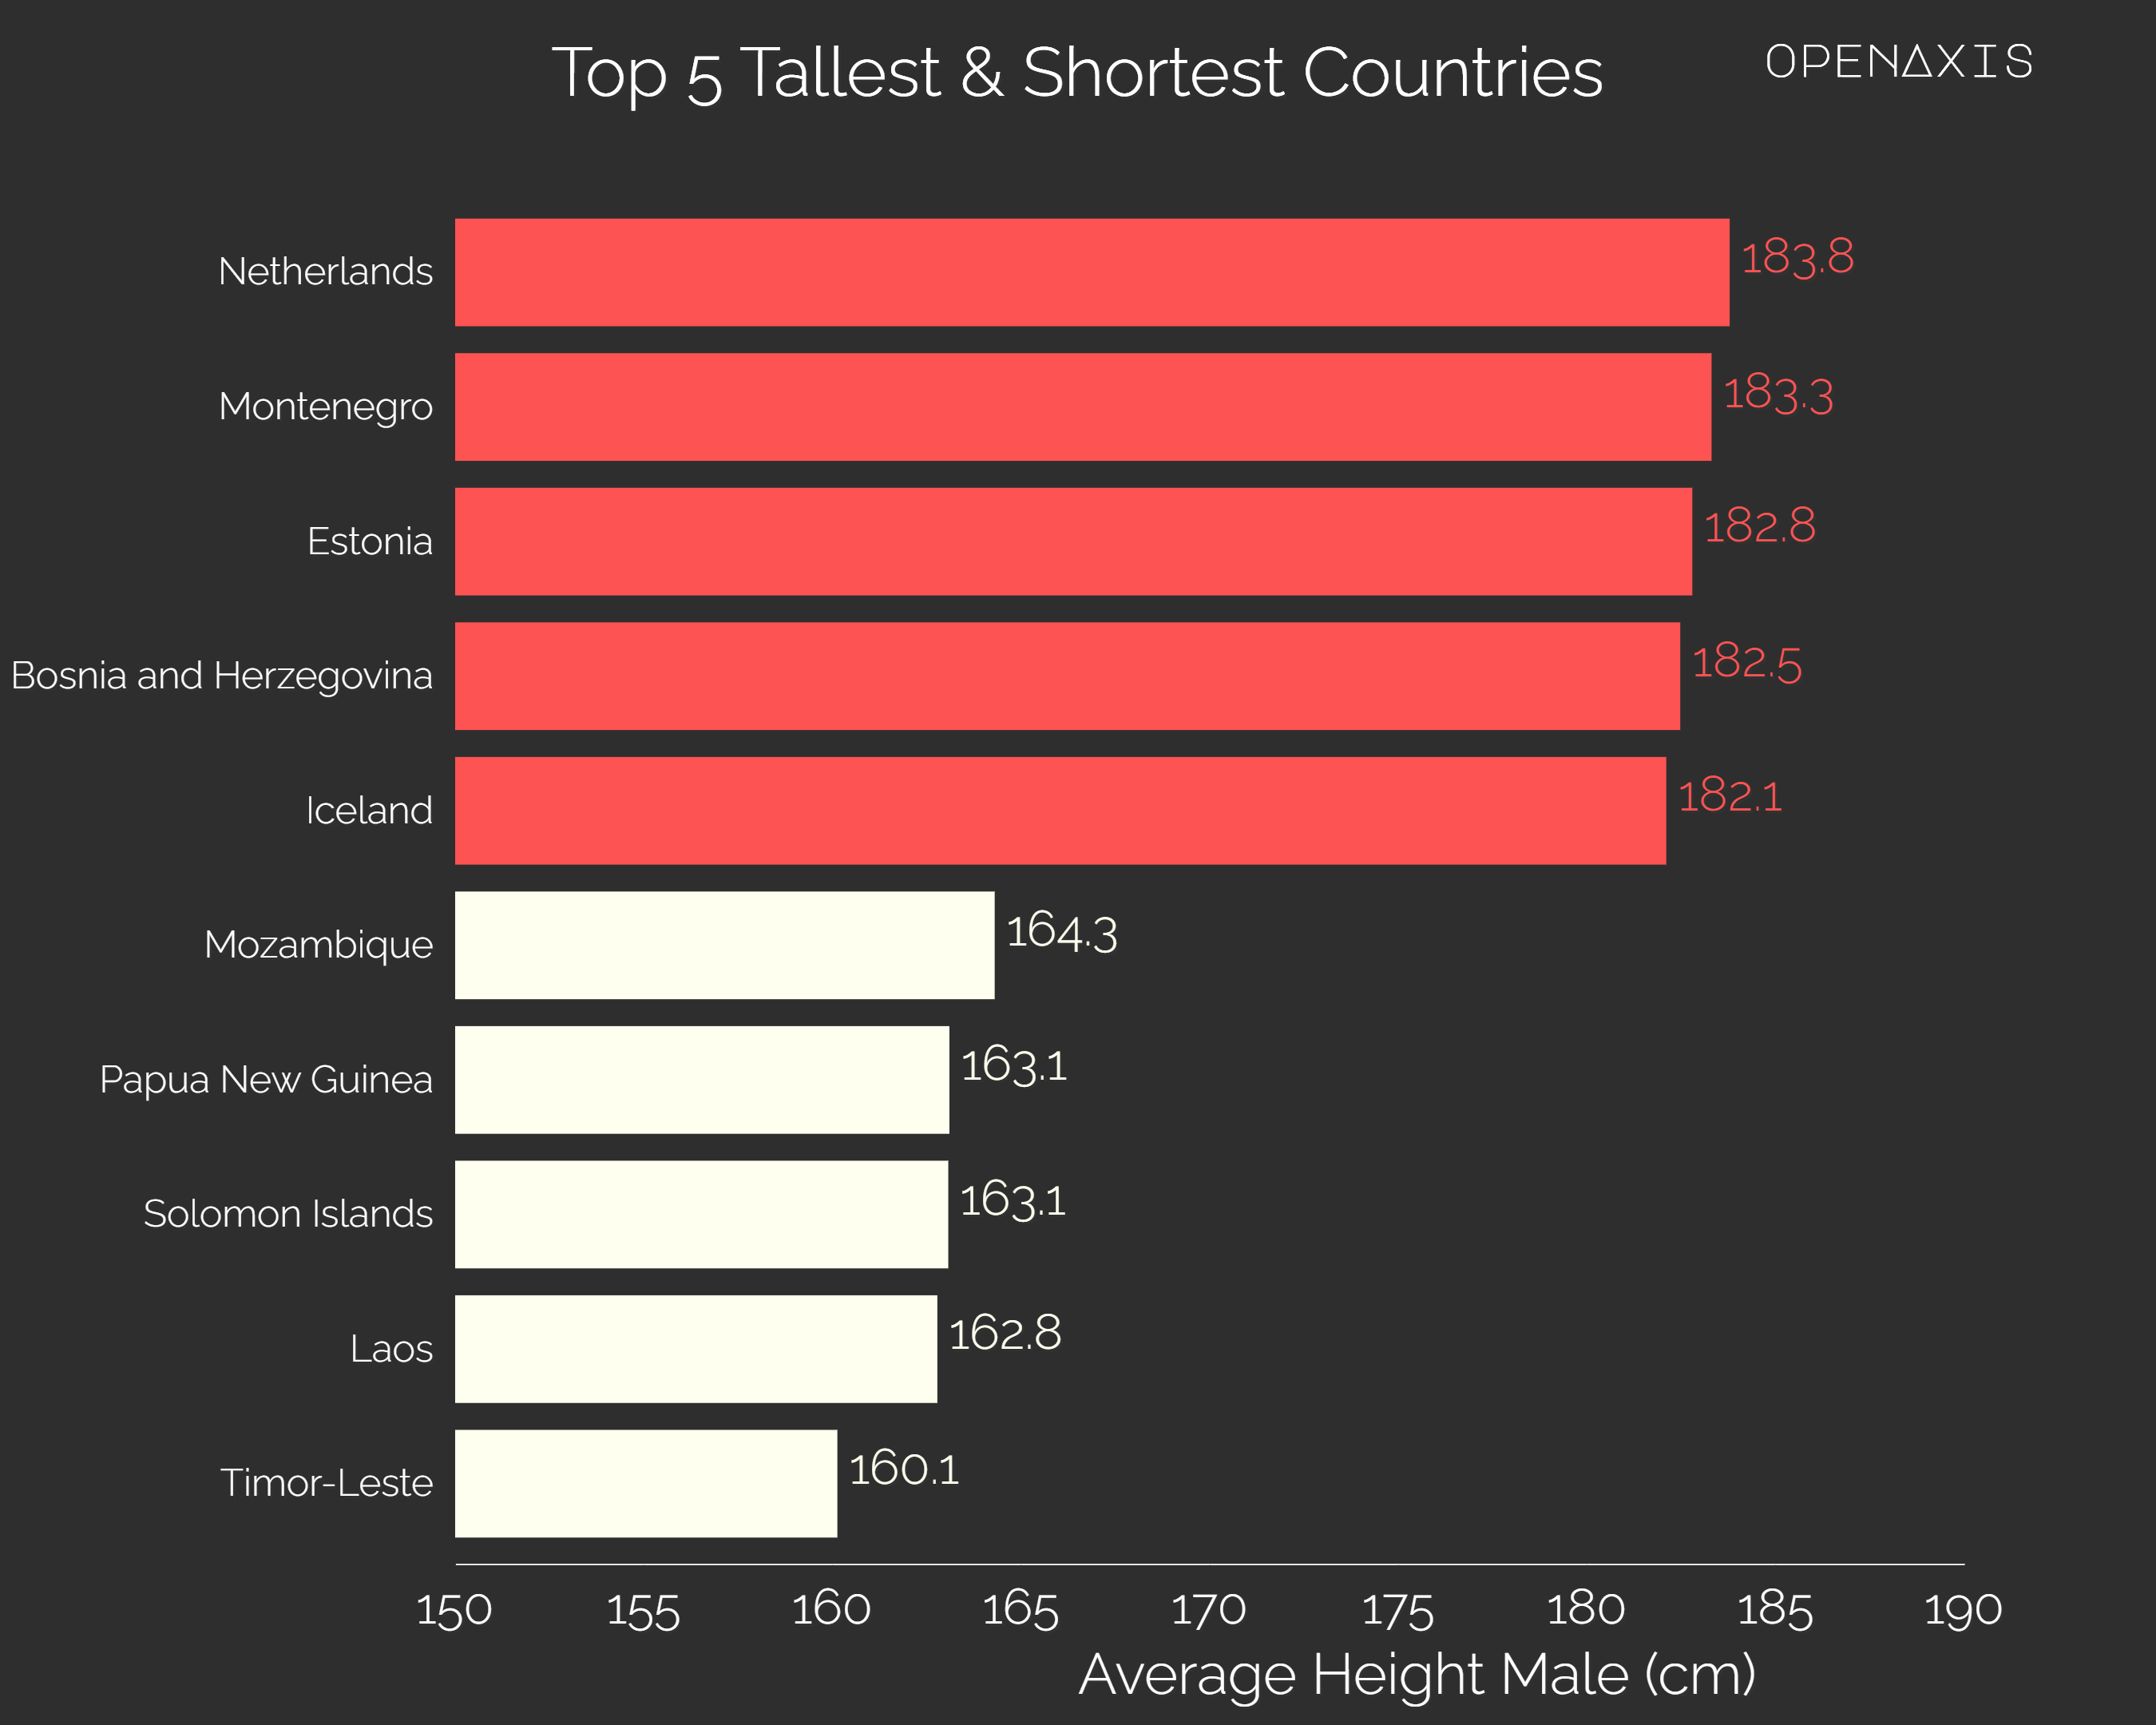 Top 5 tallest and shortest countries